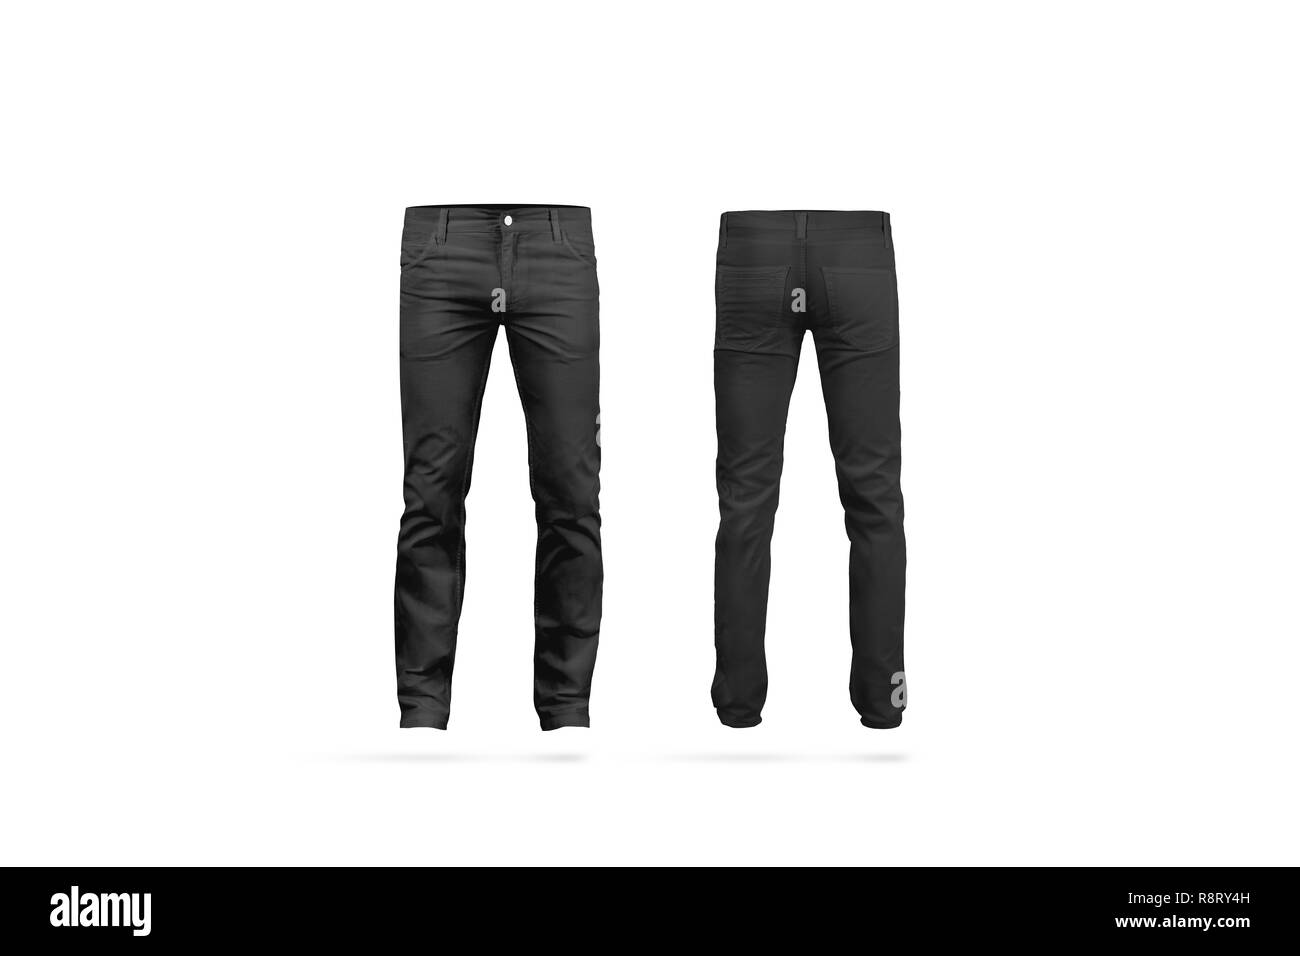 Blank black mens pants mock up, isolated, front and back side view. Empty classic male trousers mockup. Clear denim clothing for work template. Casual jeans for office uniform. Stock Photo